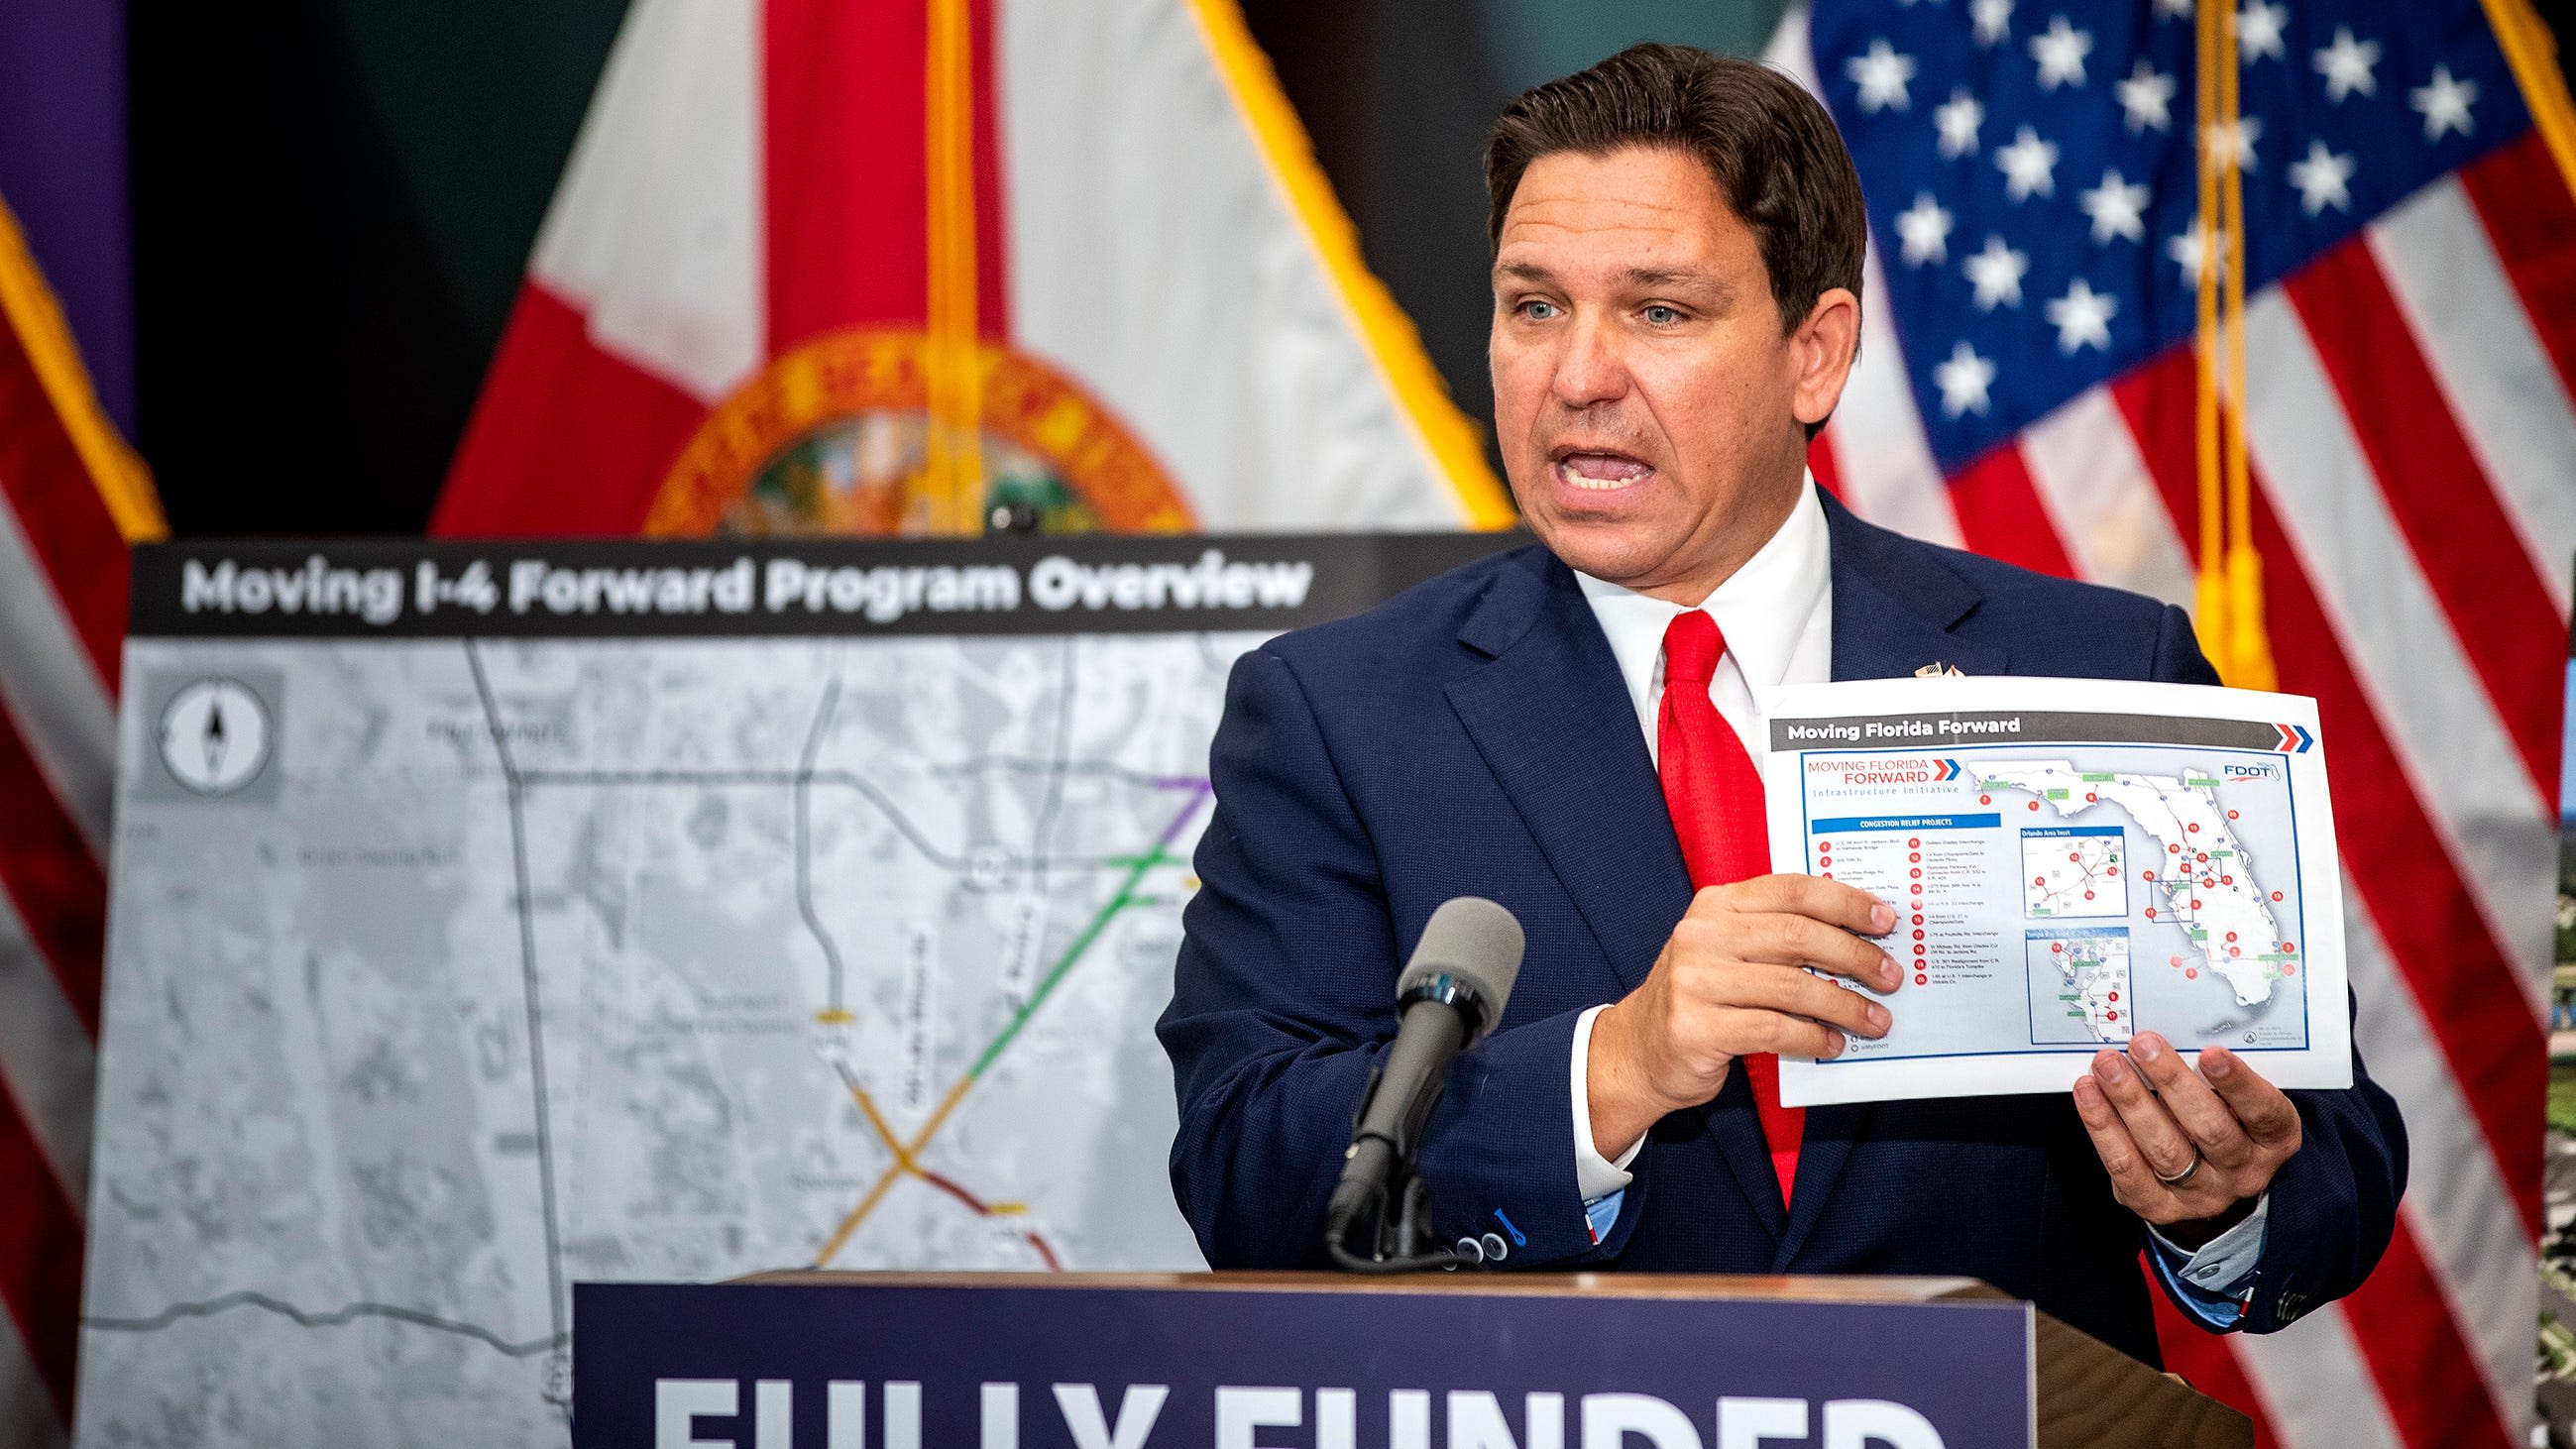 DeSantis lawyer tells appeals judges governor has 'executive privilege' to conceal records